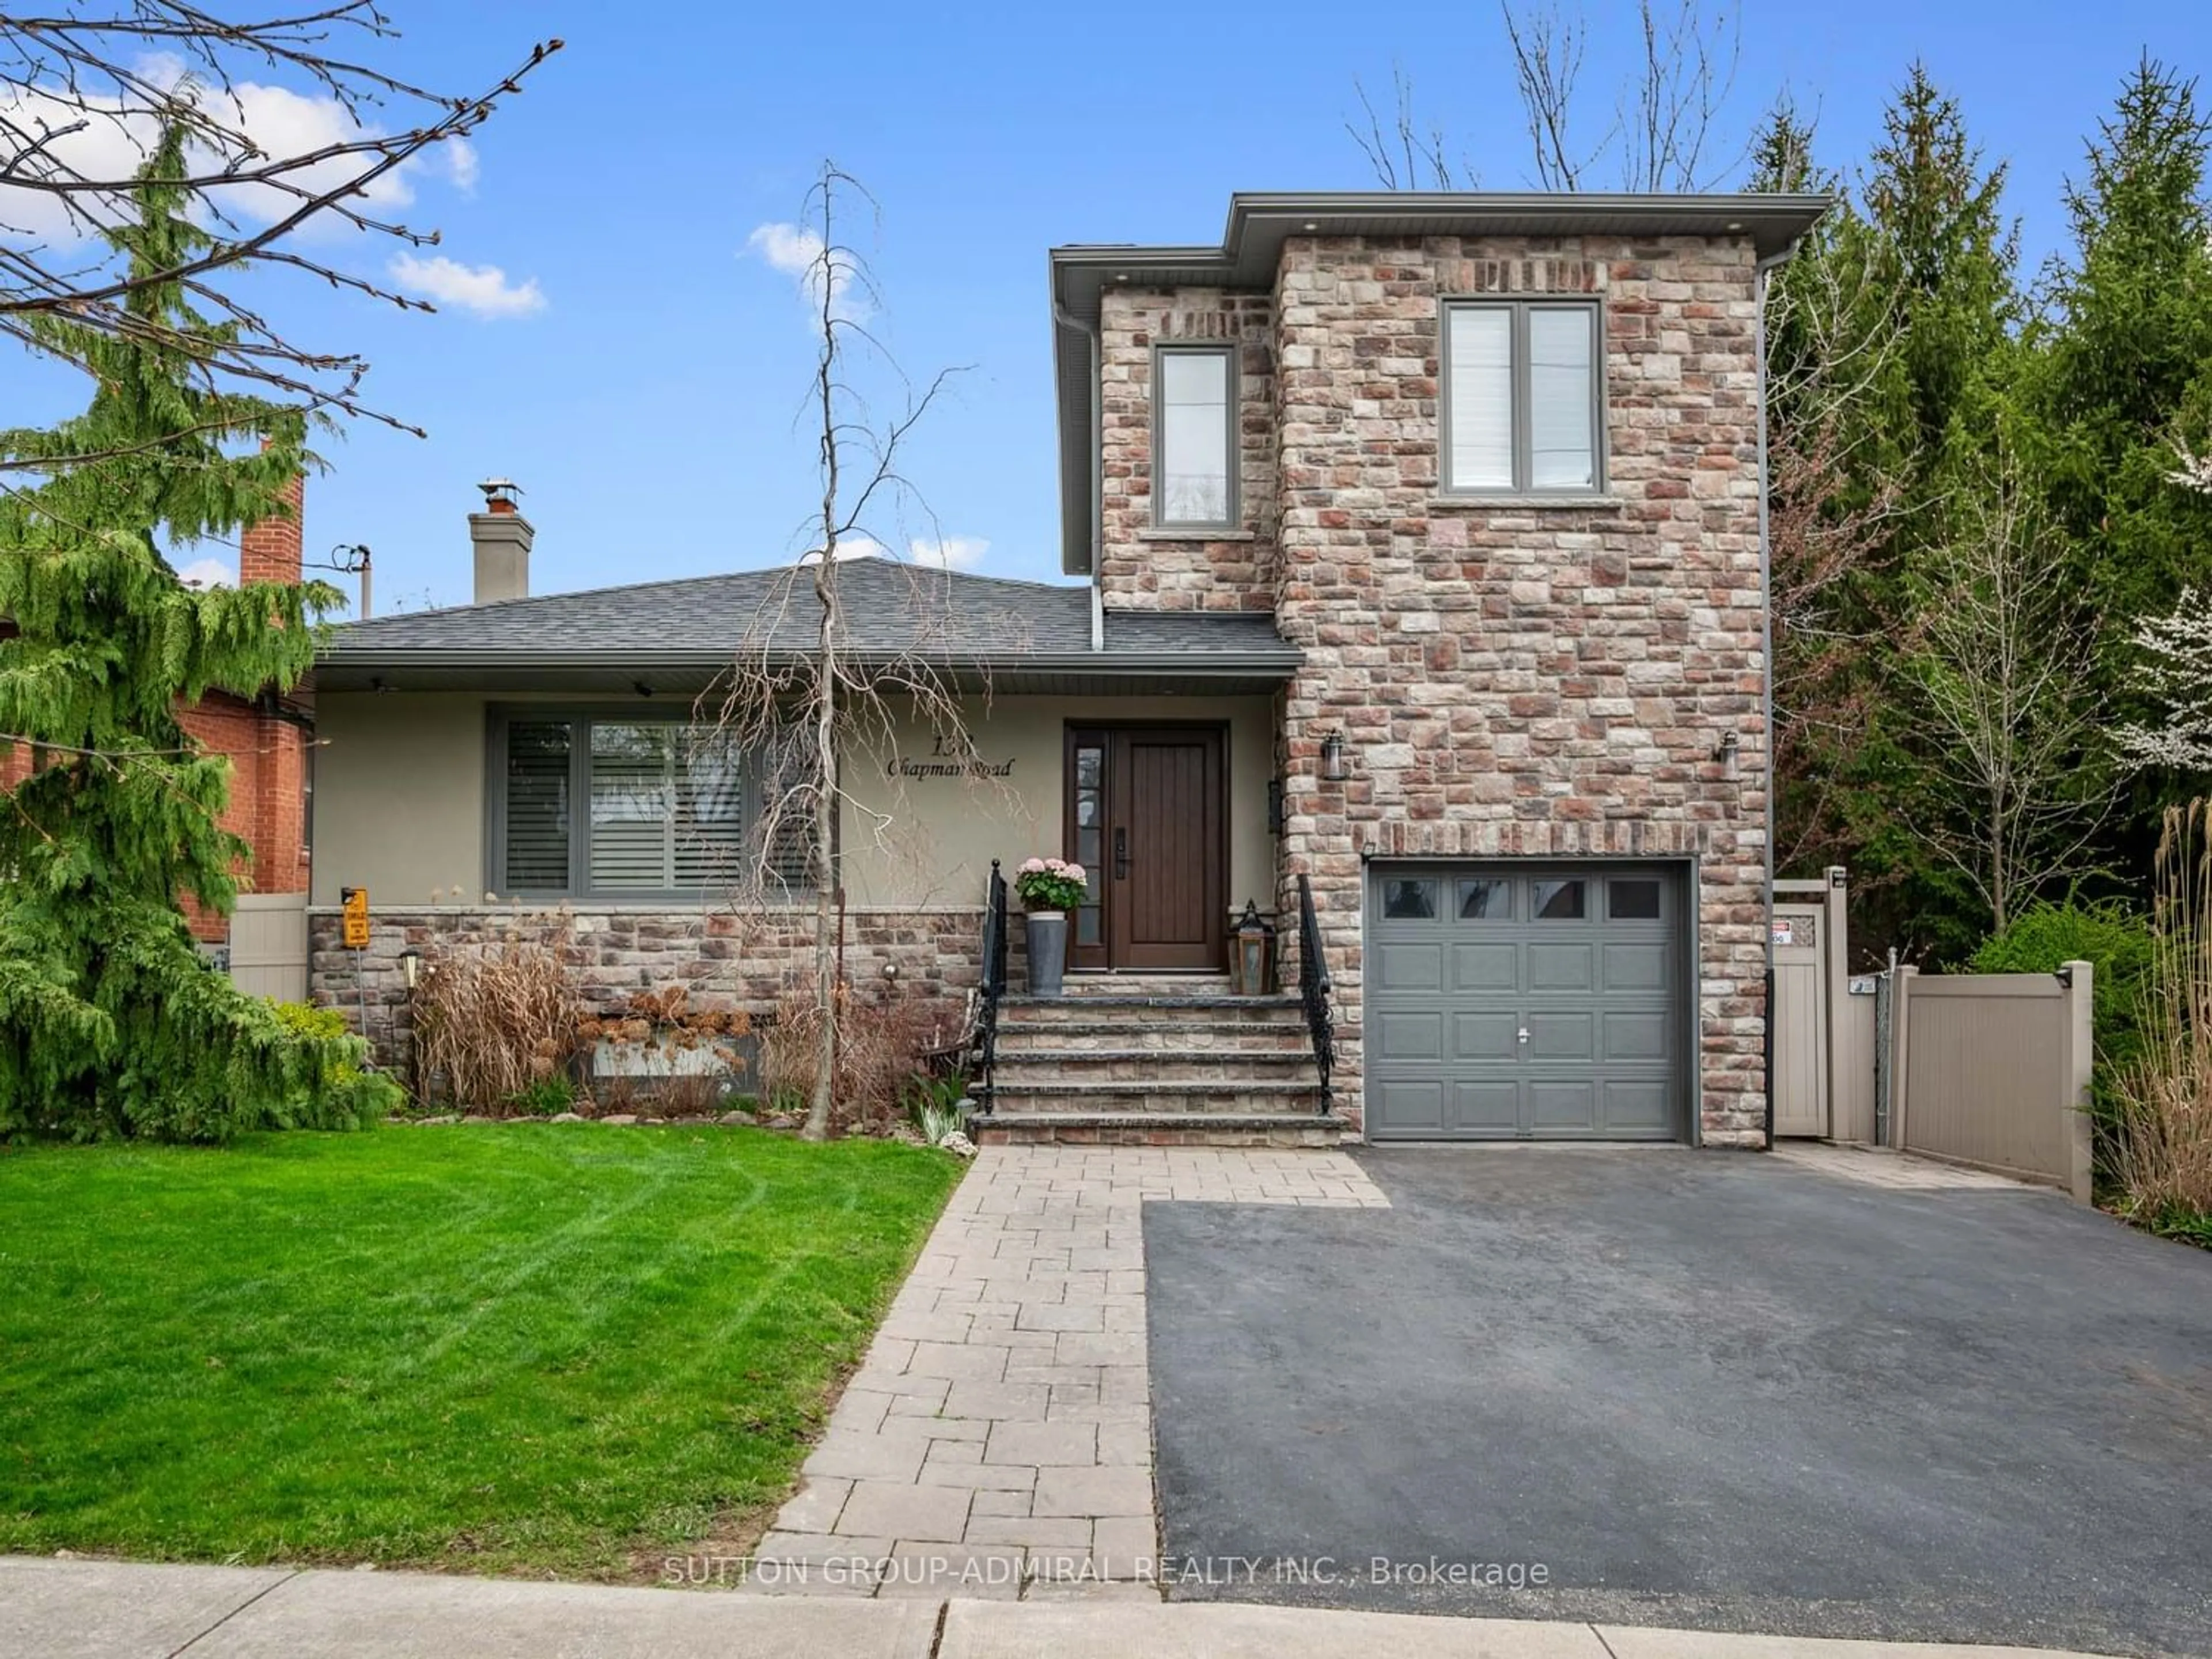 Home with brick exterior material for 138 Chapman Rd, Toronto Ontario M9P 1G3